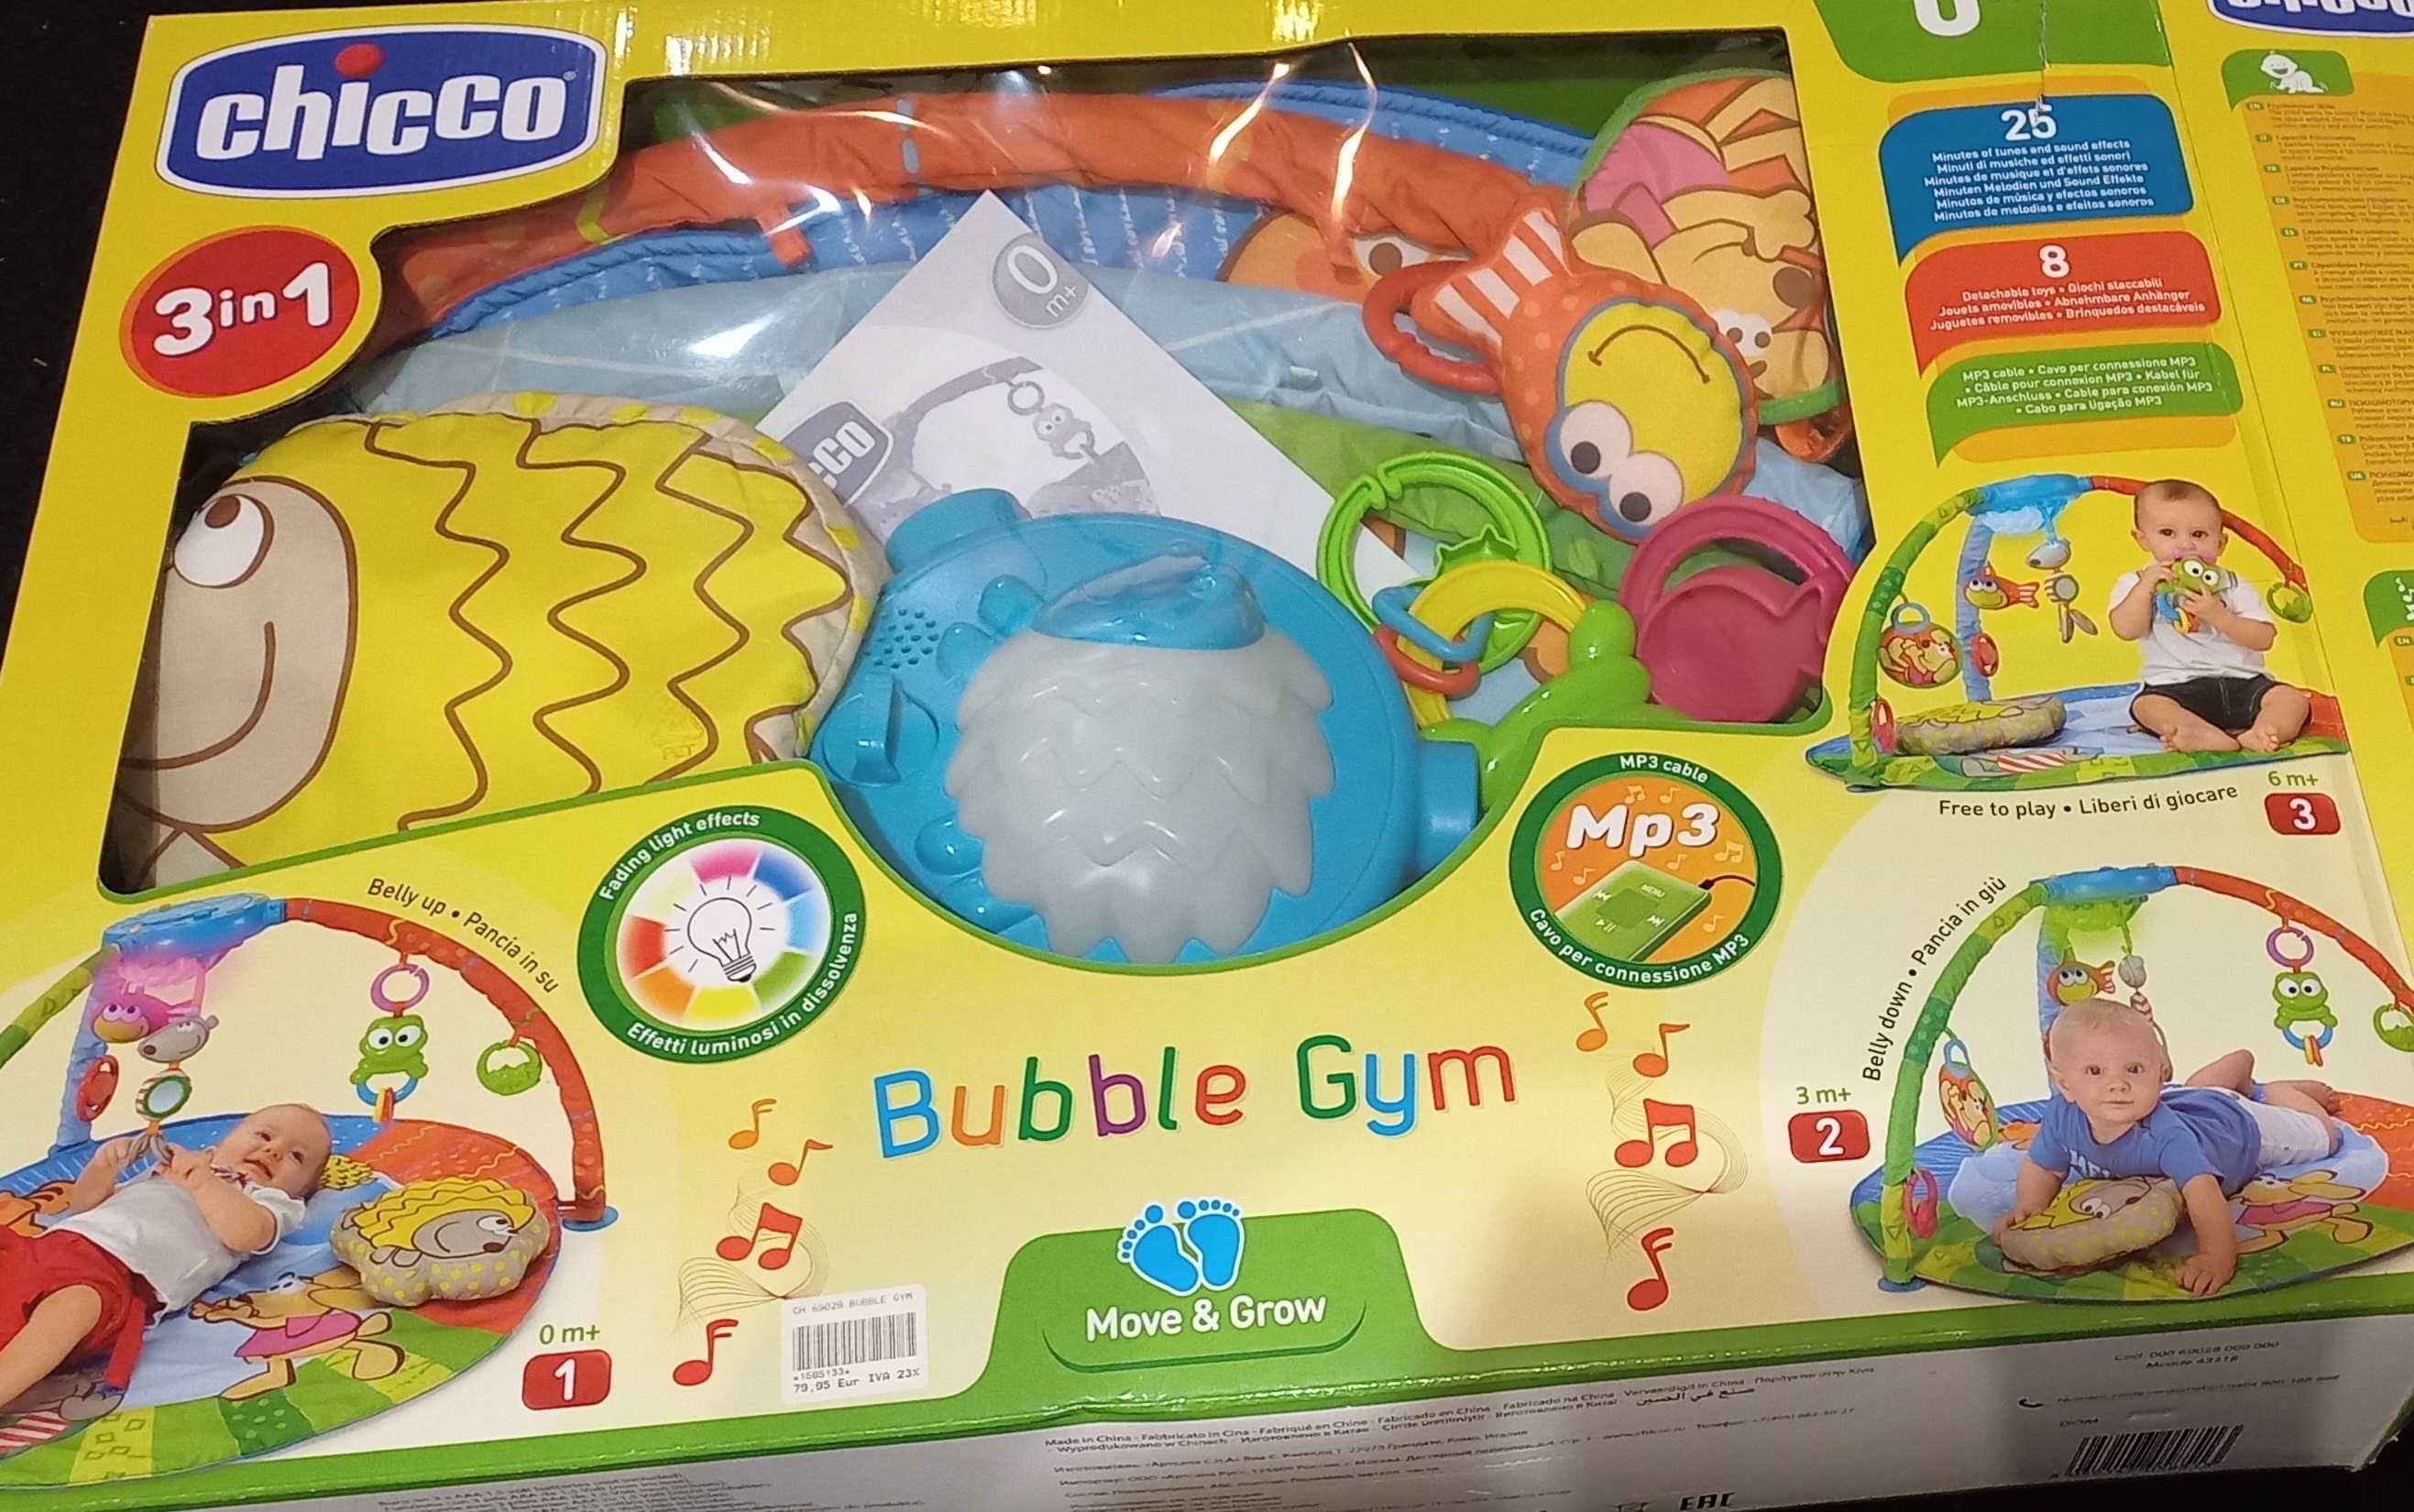 Tapete/ginásio atividades bubble gym CHICCO